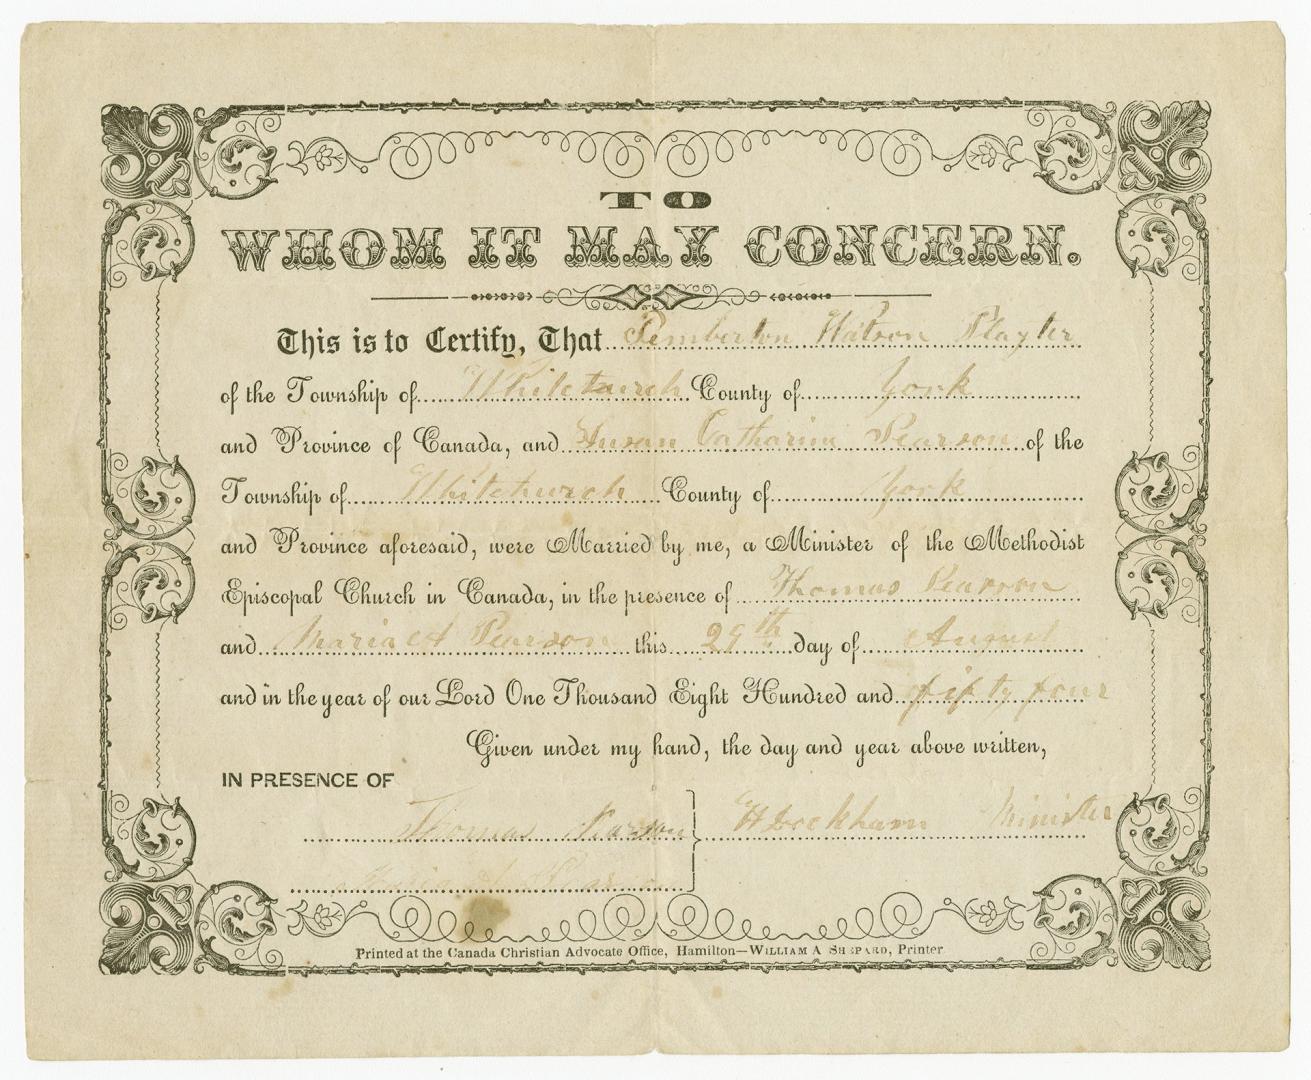 To whom it may concern, this is to certify, that [Pemberton Watson Playter]